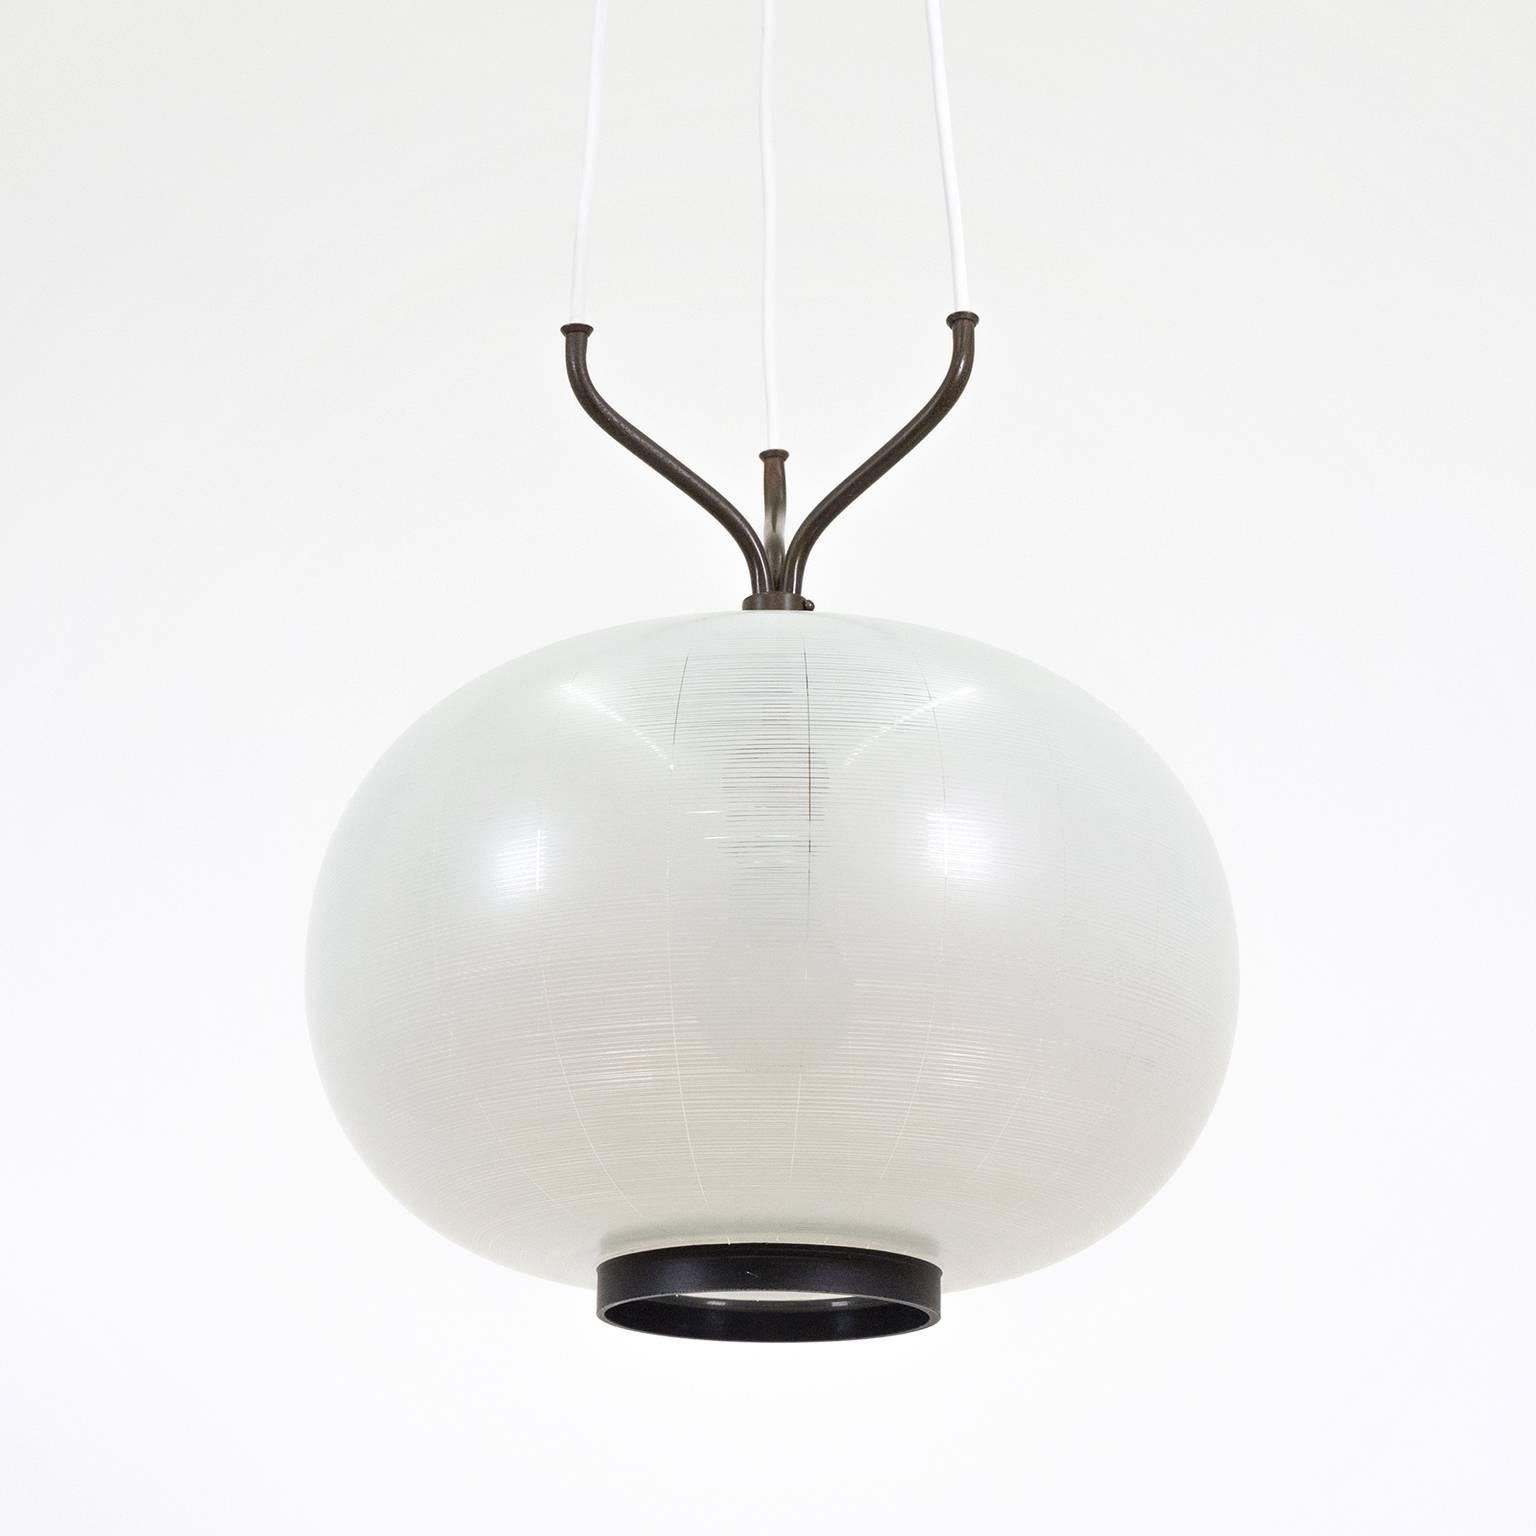 Superb Stilnovo pendant in brass and enameled glass from the 1950s. The hardware is made of very dark patinated brass. The glass has a very fine white pinstripe decor with a black rim at the bottom. Excellent original condition. One original brass